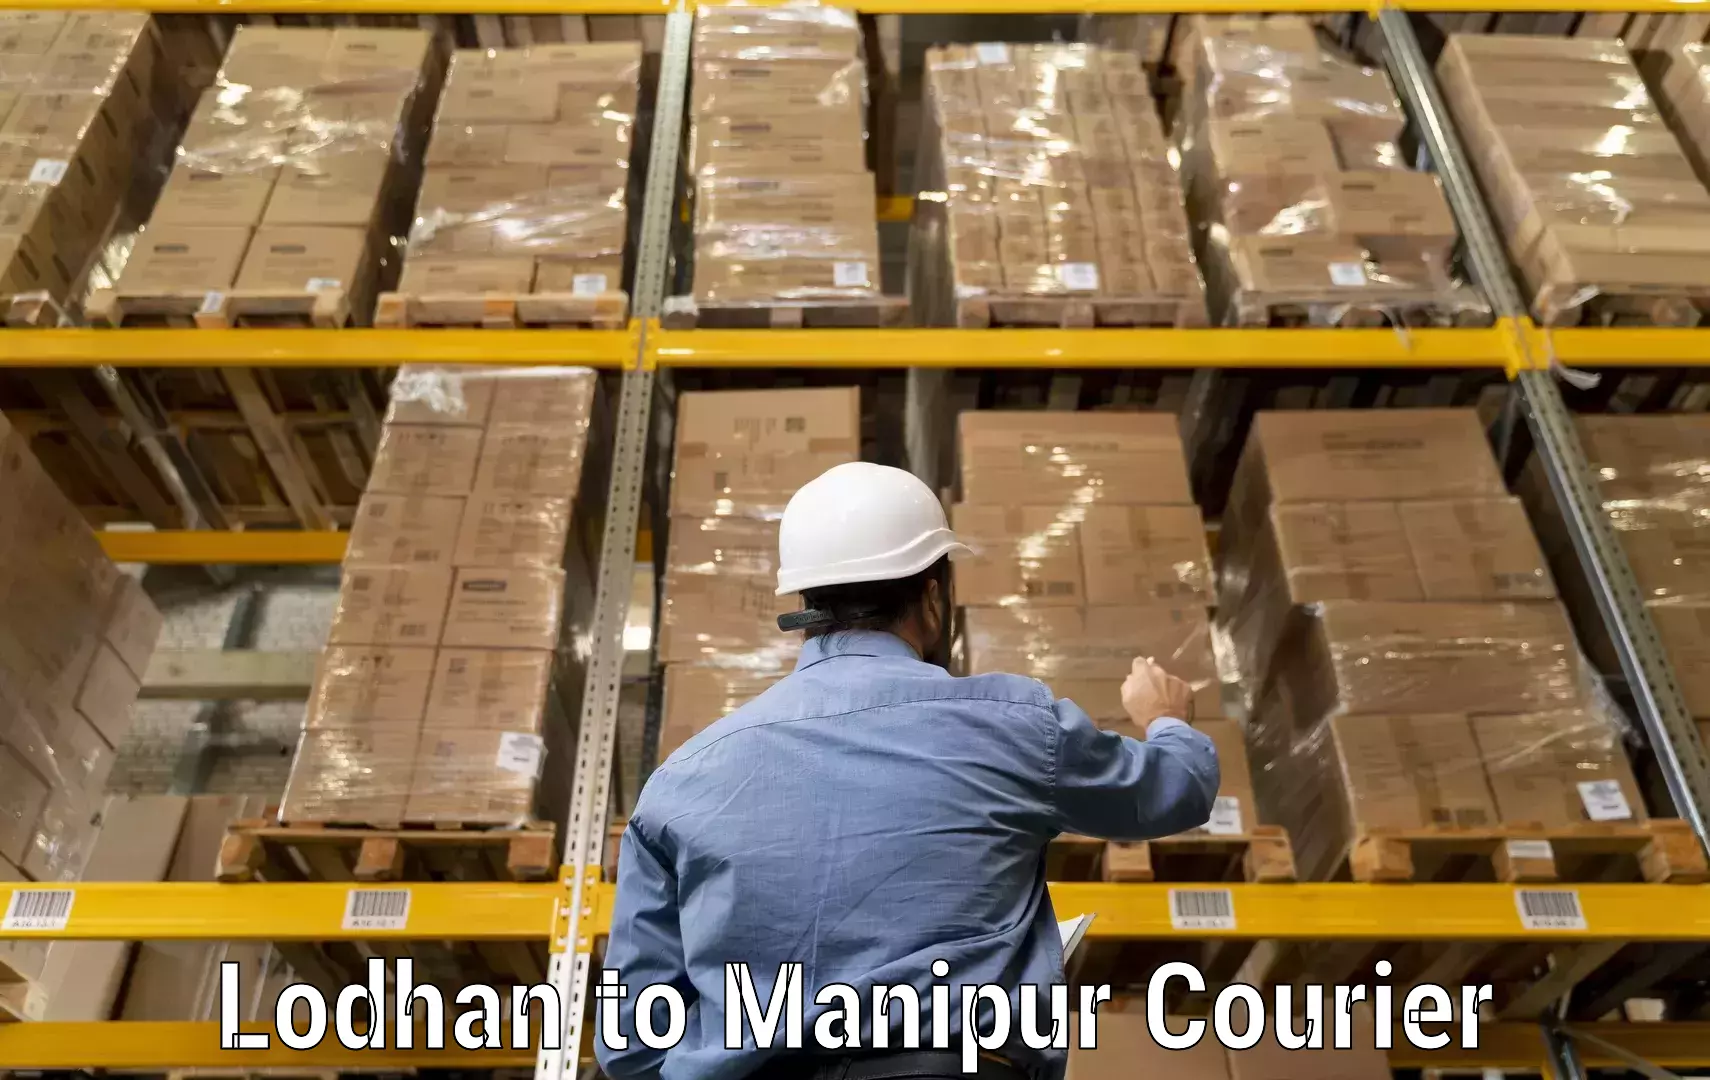 Advanced delivery network Lodhan to Manipur